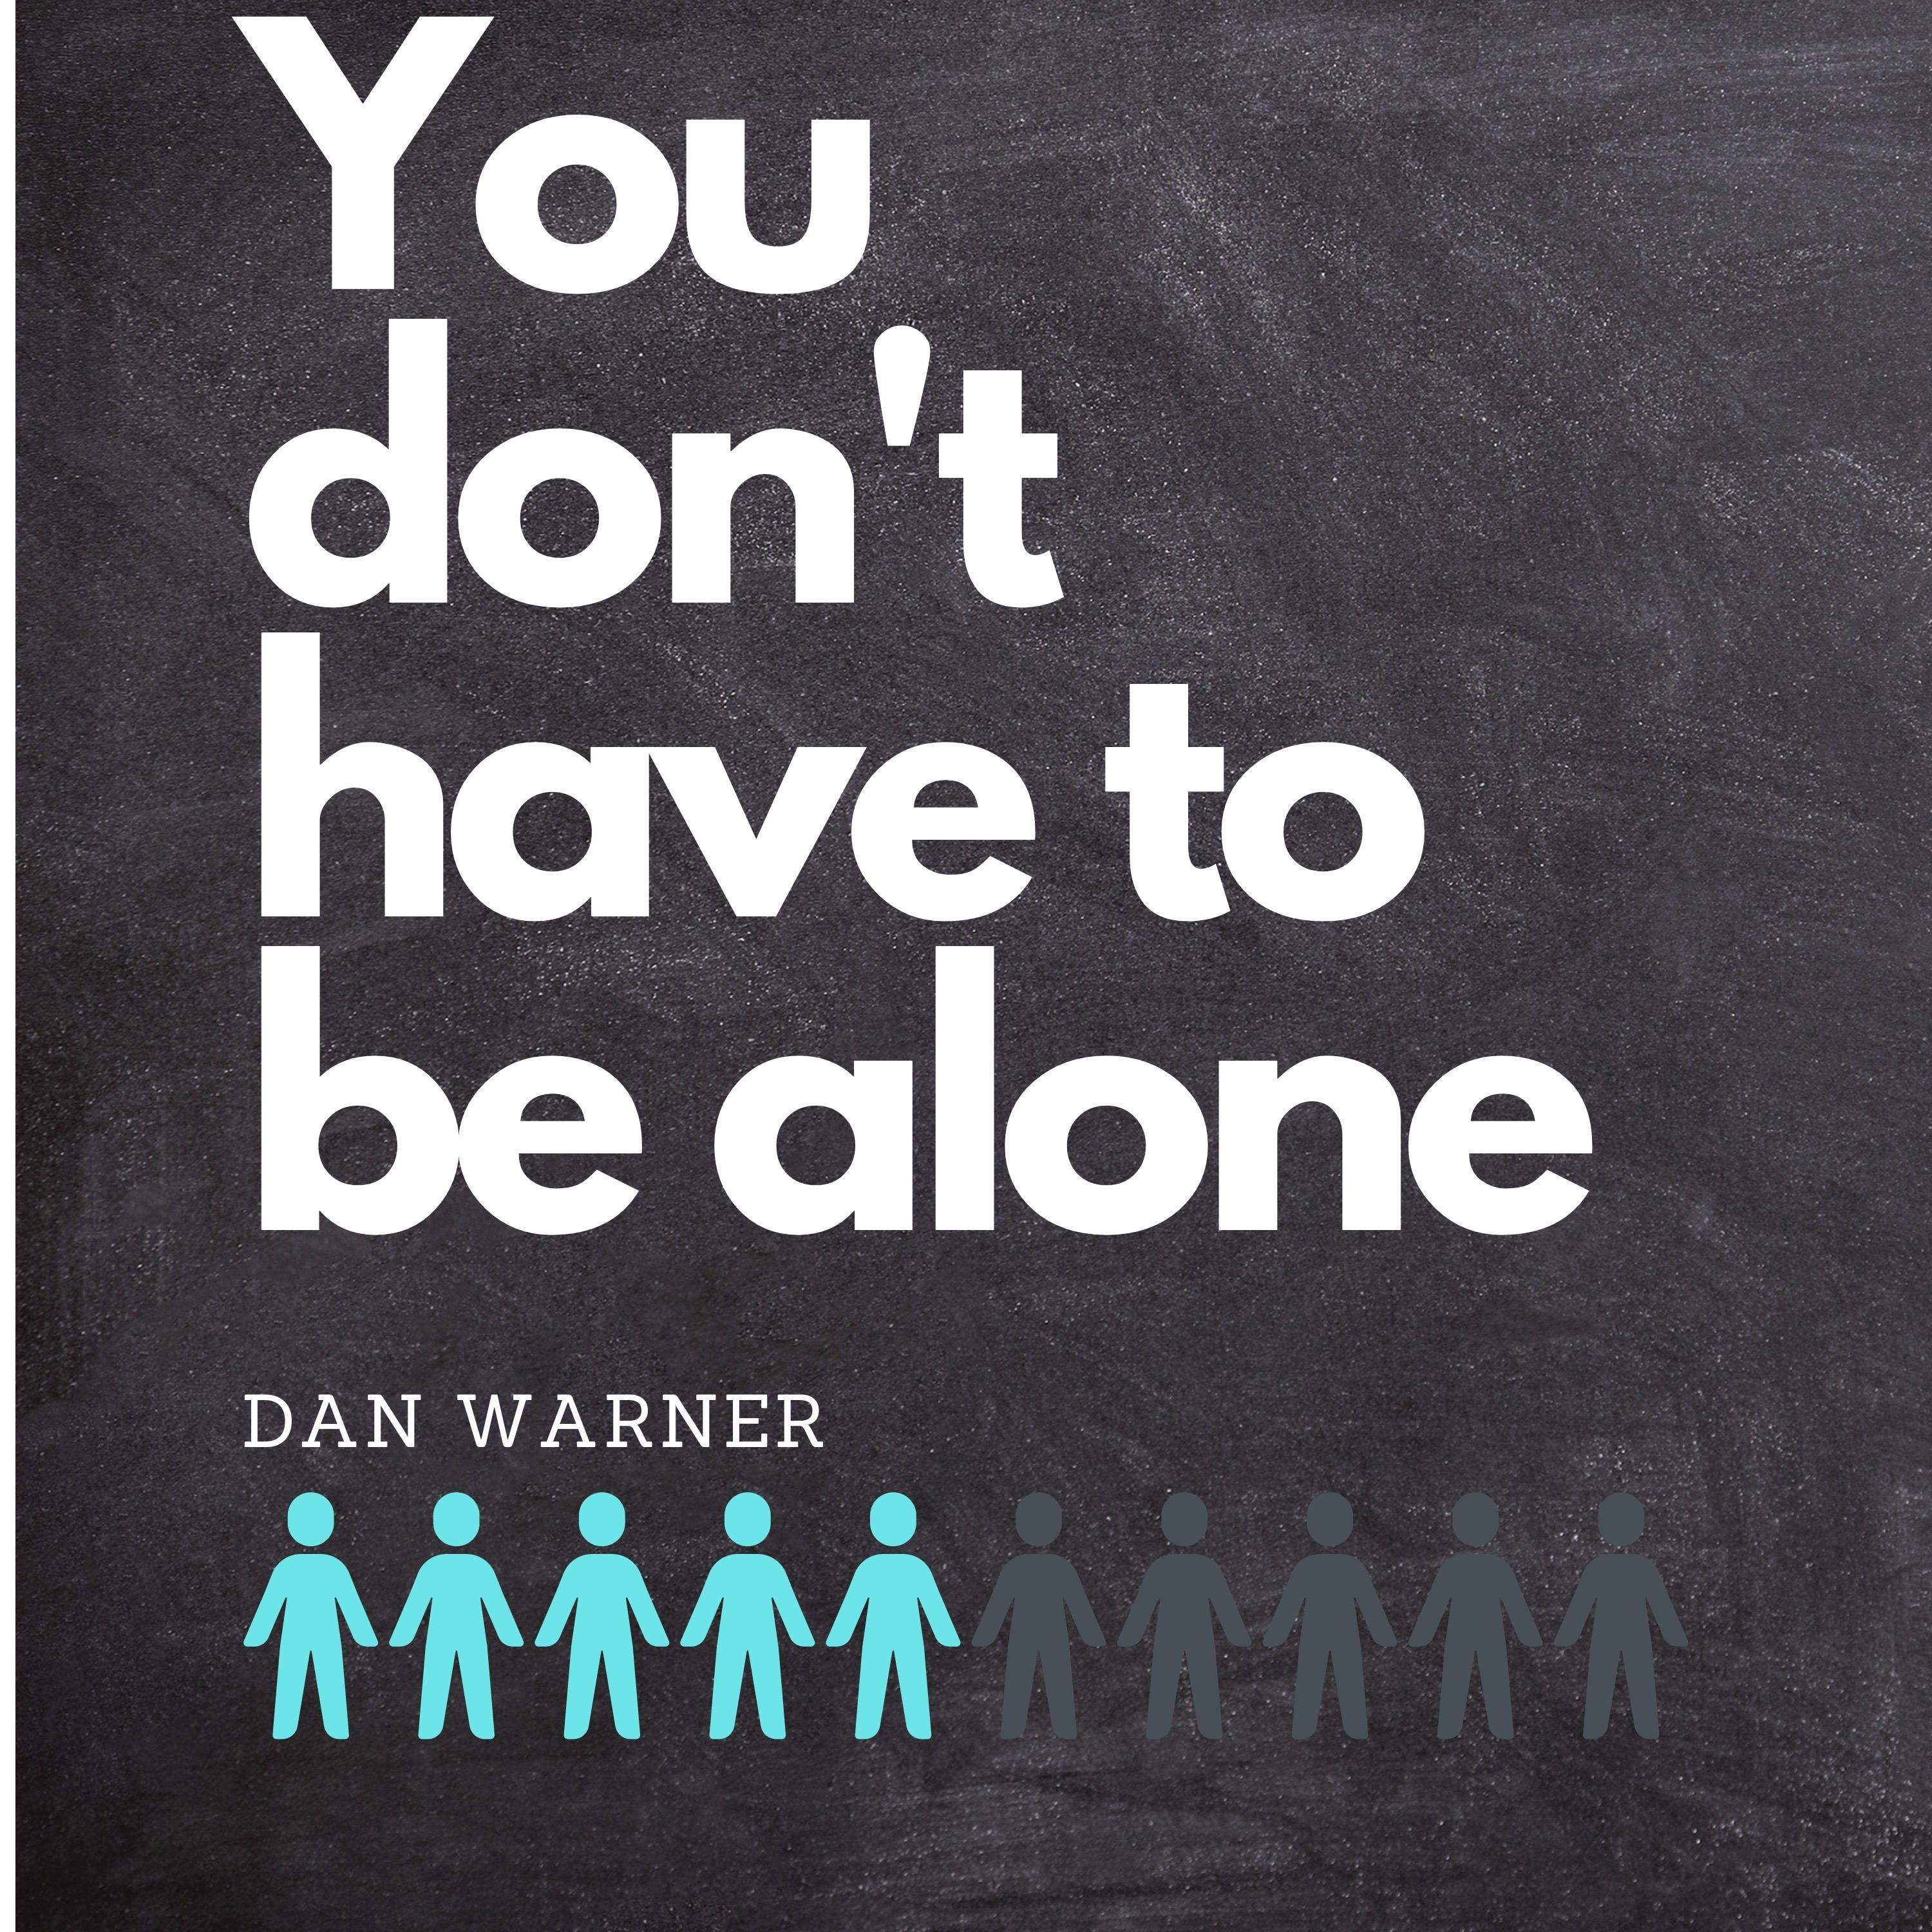 You don't have to be alone